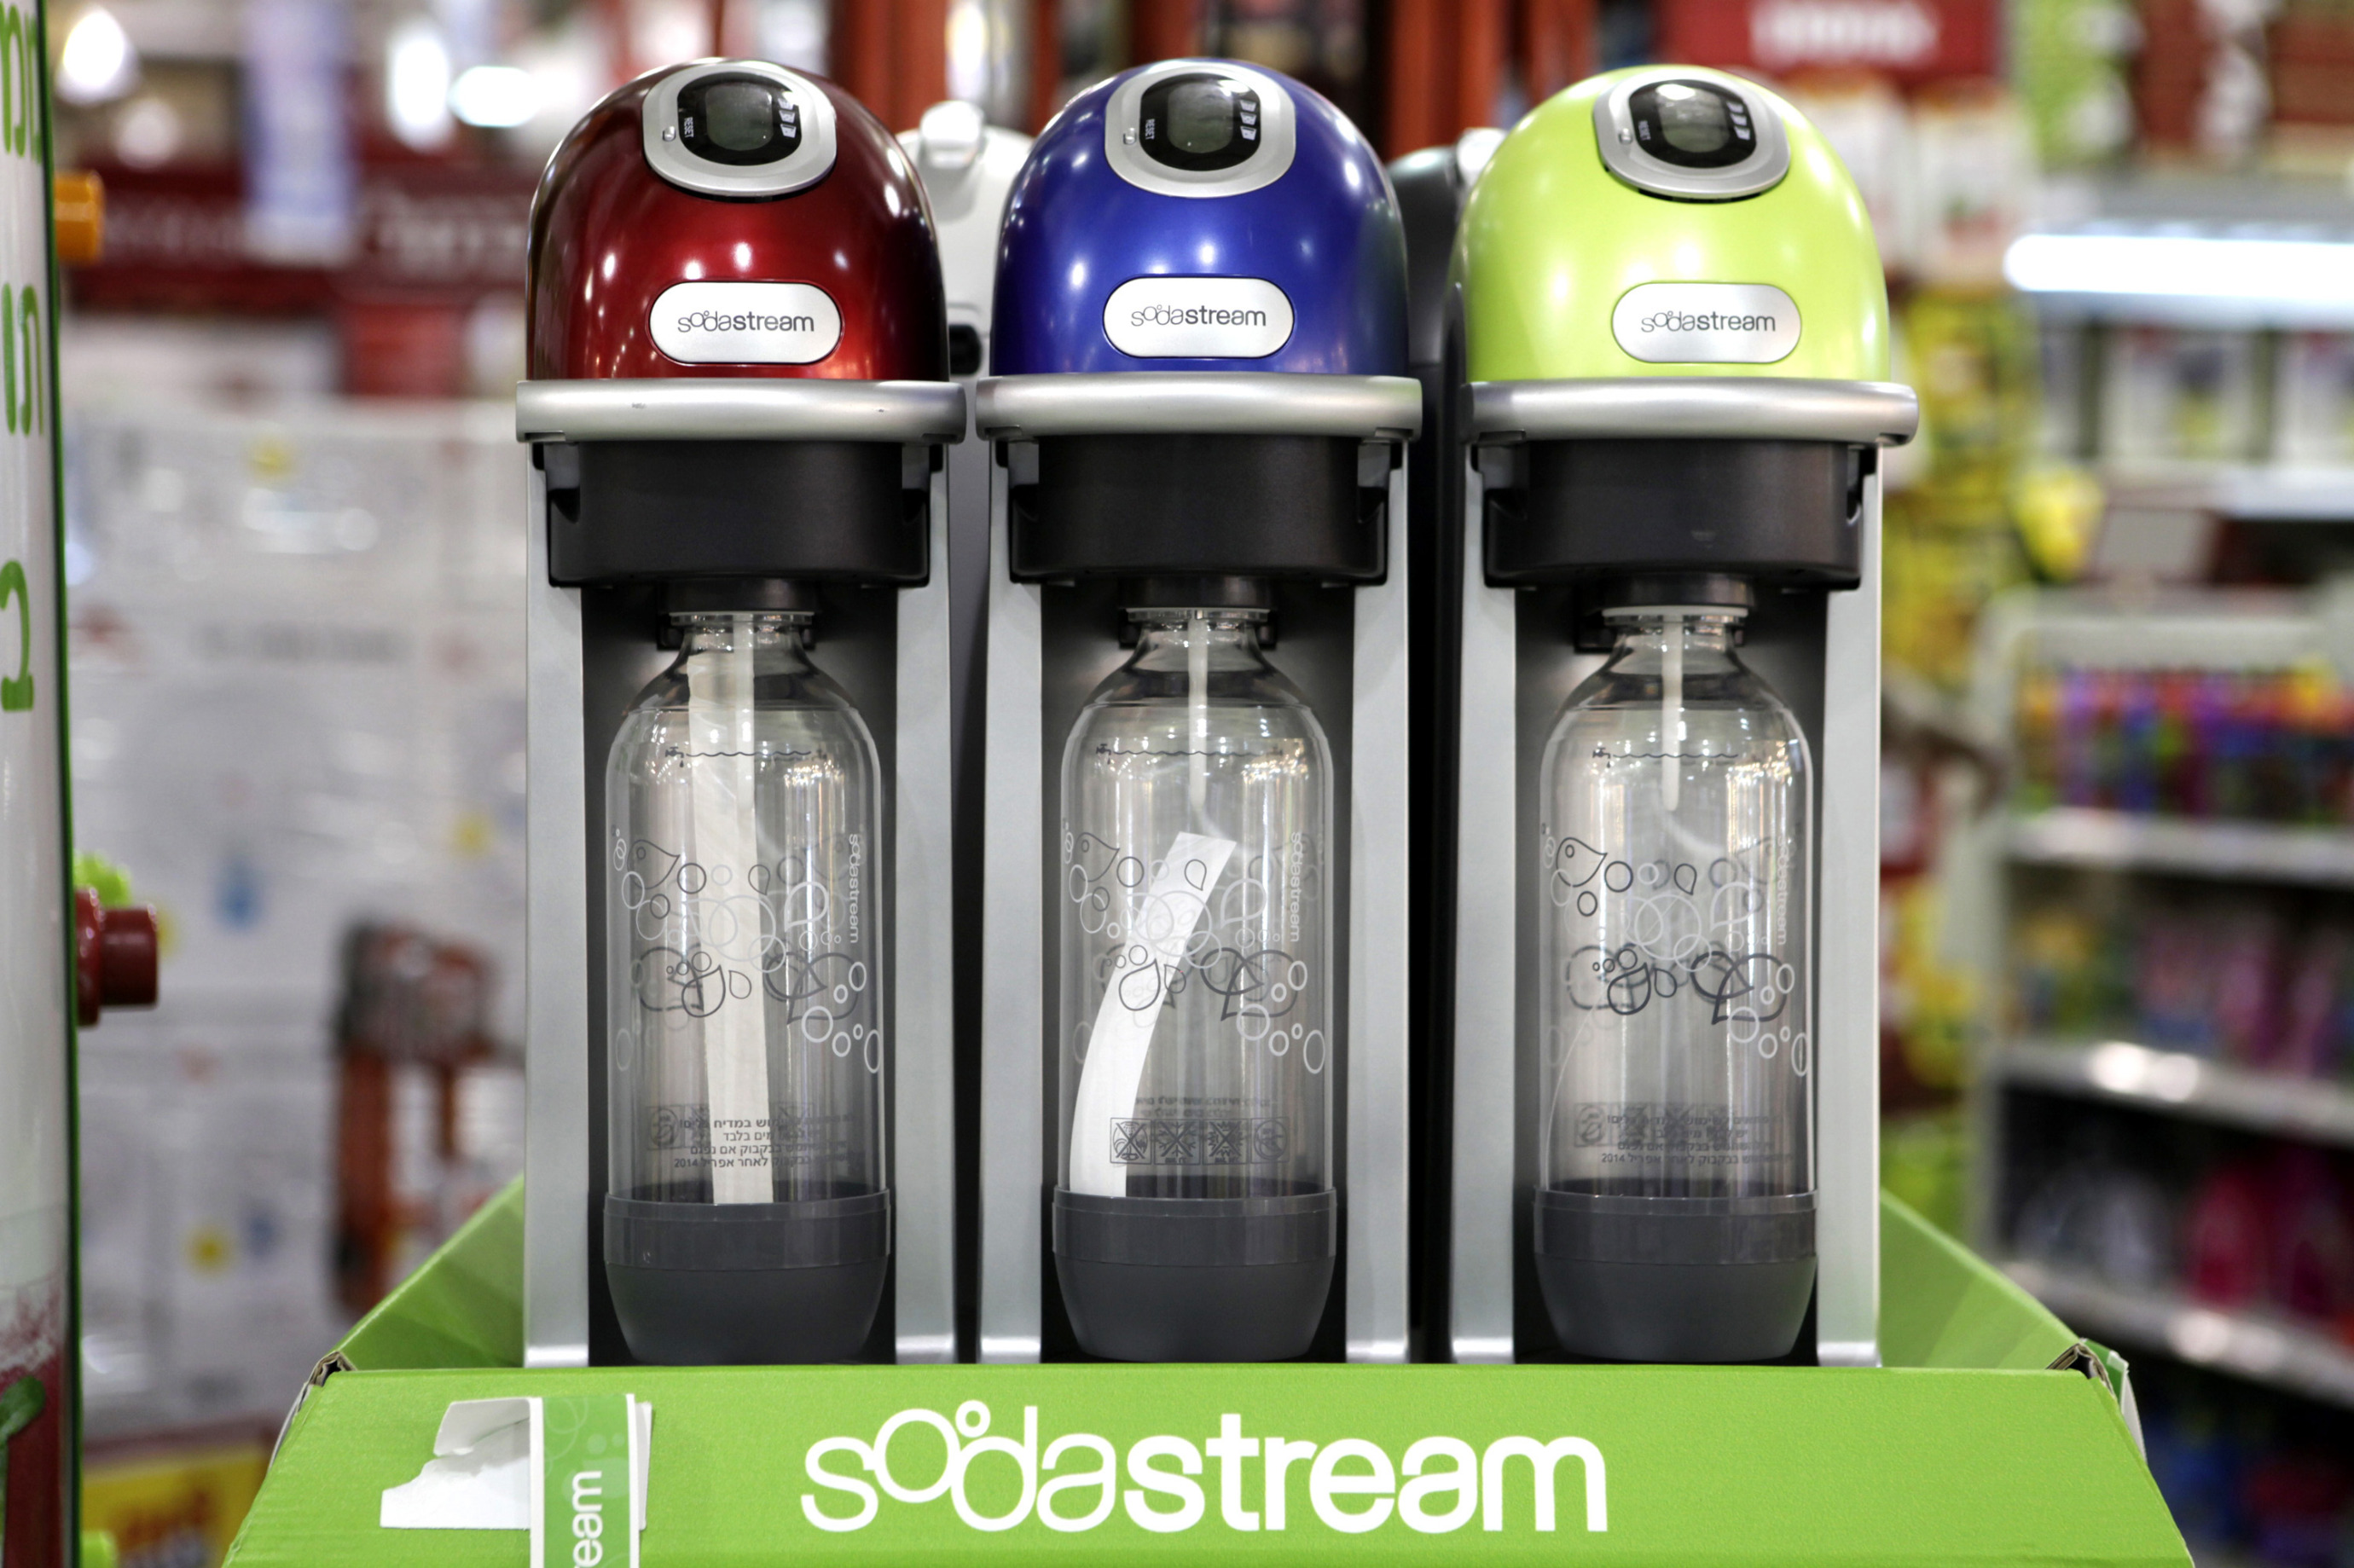 Pepsi's Foray Into The Home Carbonation Category With SodaStream: Sales  Results Come Into Focus (NASDAQ:PEP)